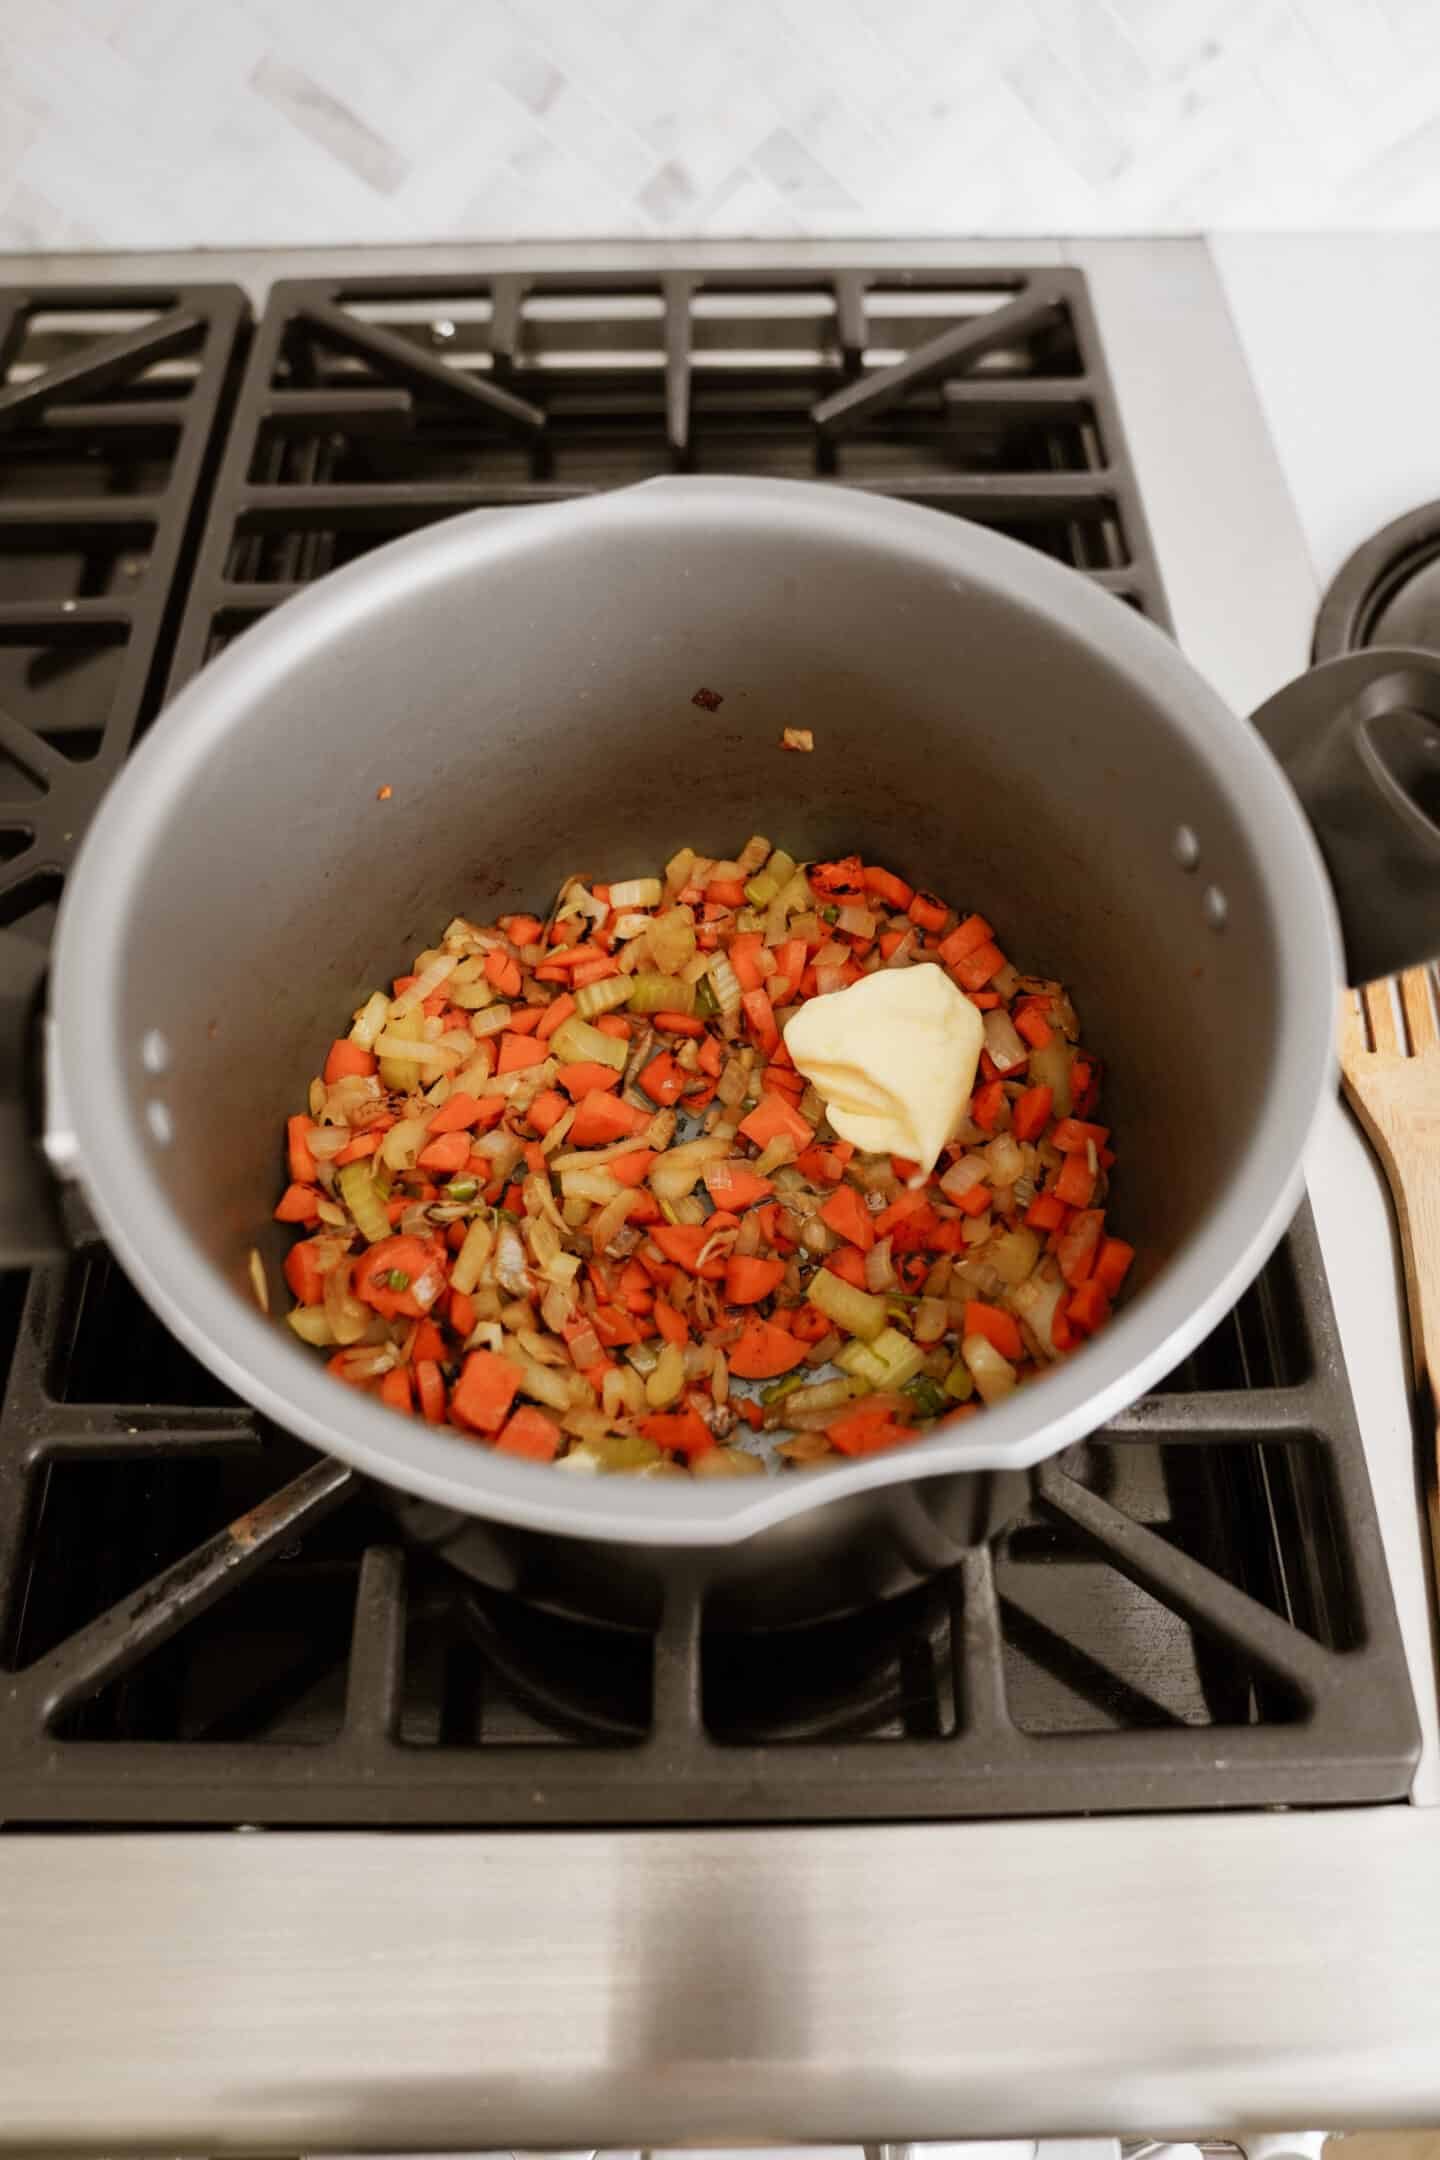 Butter added to a pot of vegetables on a stove